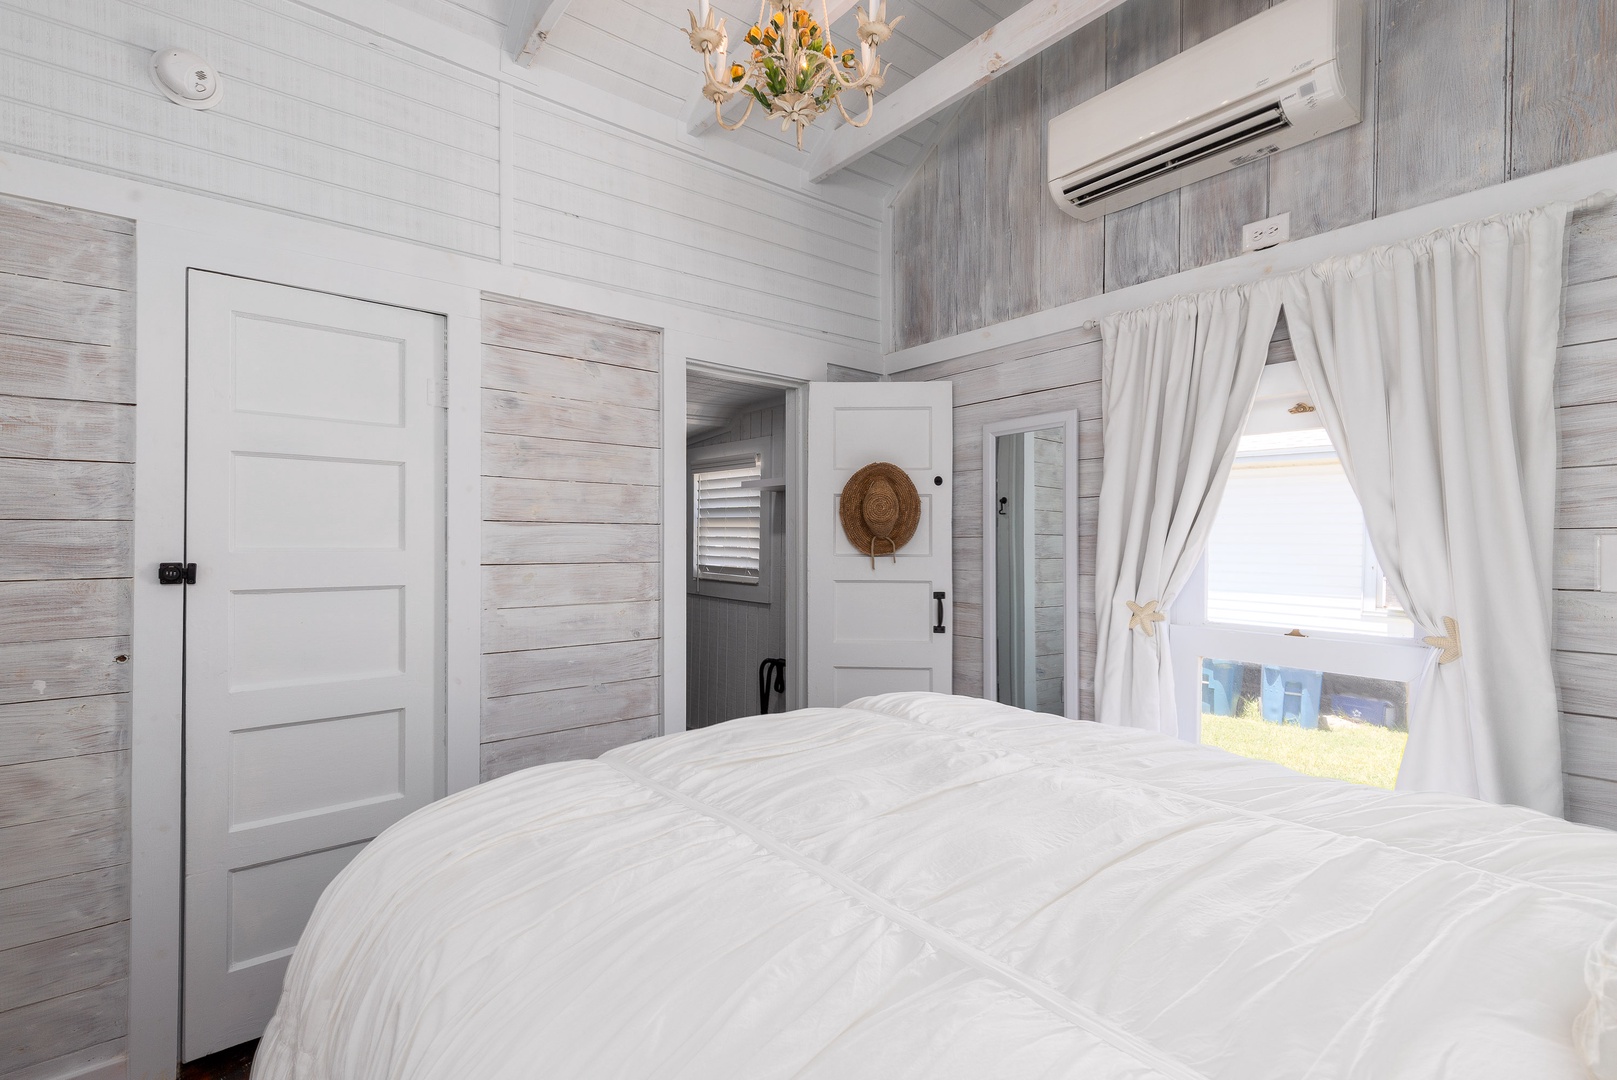 The cozy bedroom offers a plush queen bed and private en suite bathroom